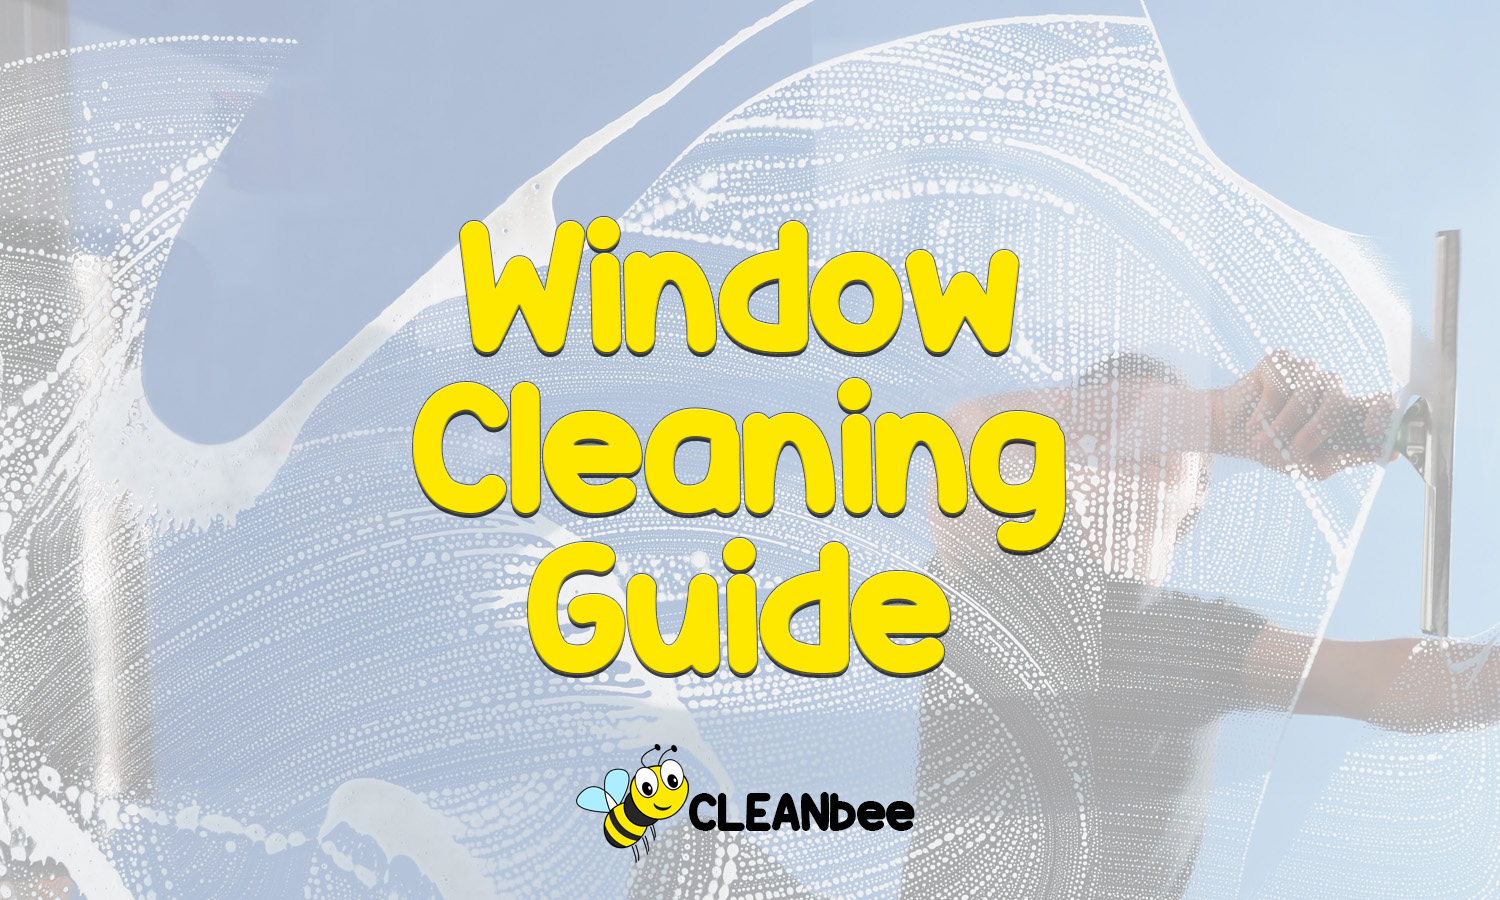 Window Cleaning Guide